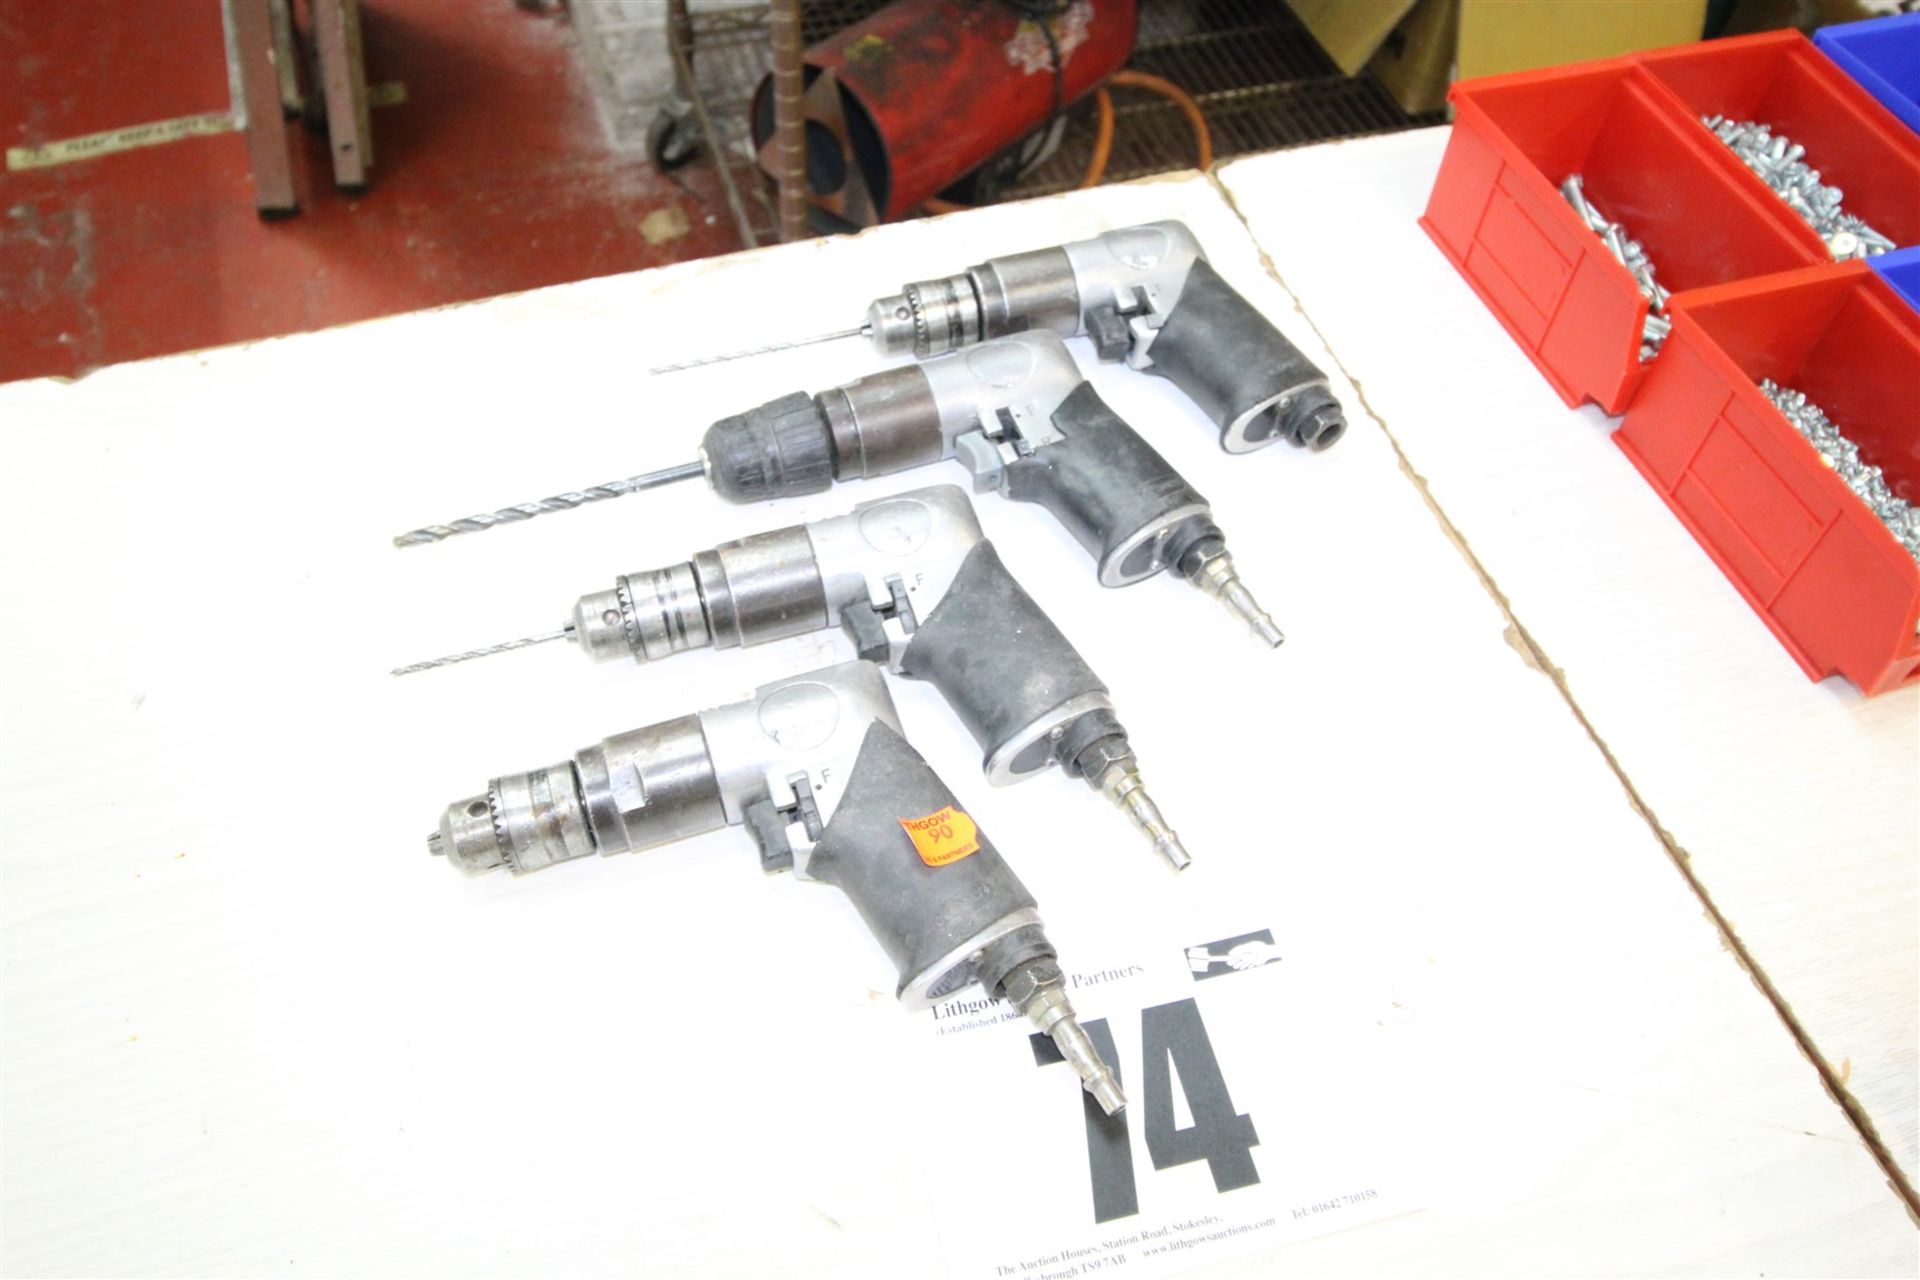 4x AIR OPERATED DRILLS WITH RUBBER HANDLES.